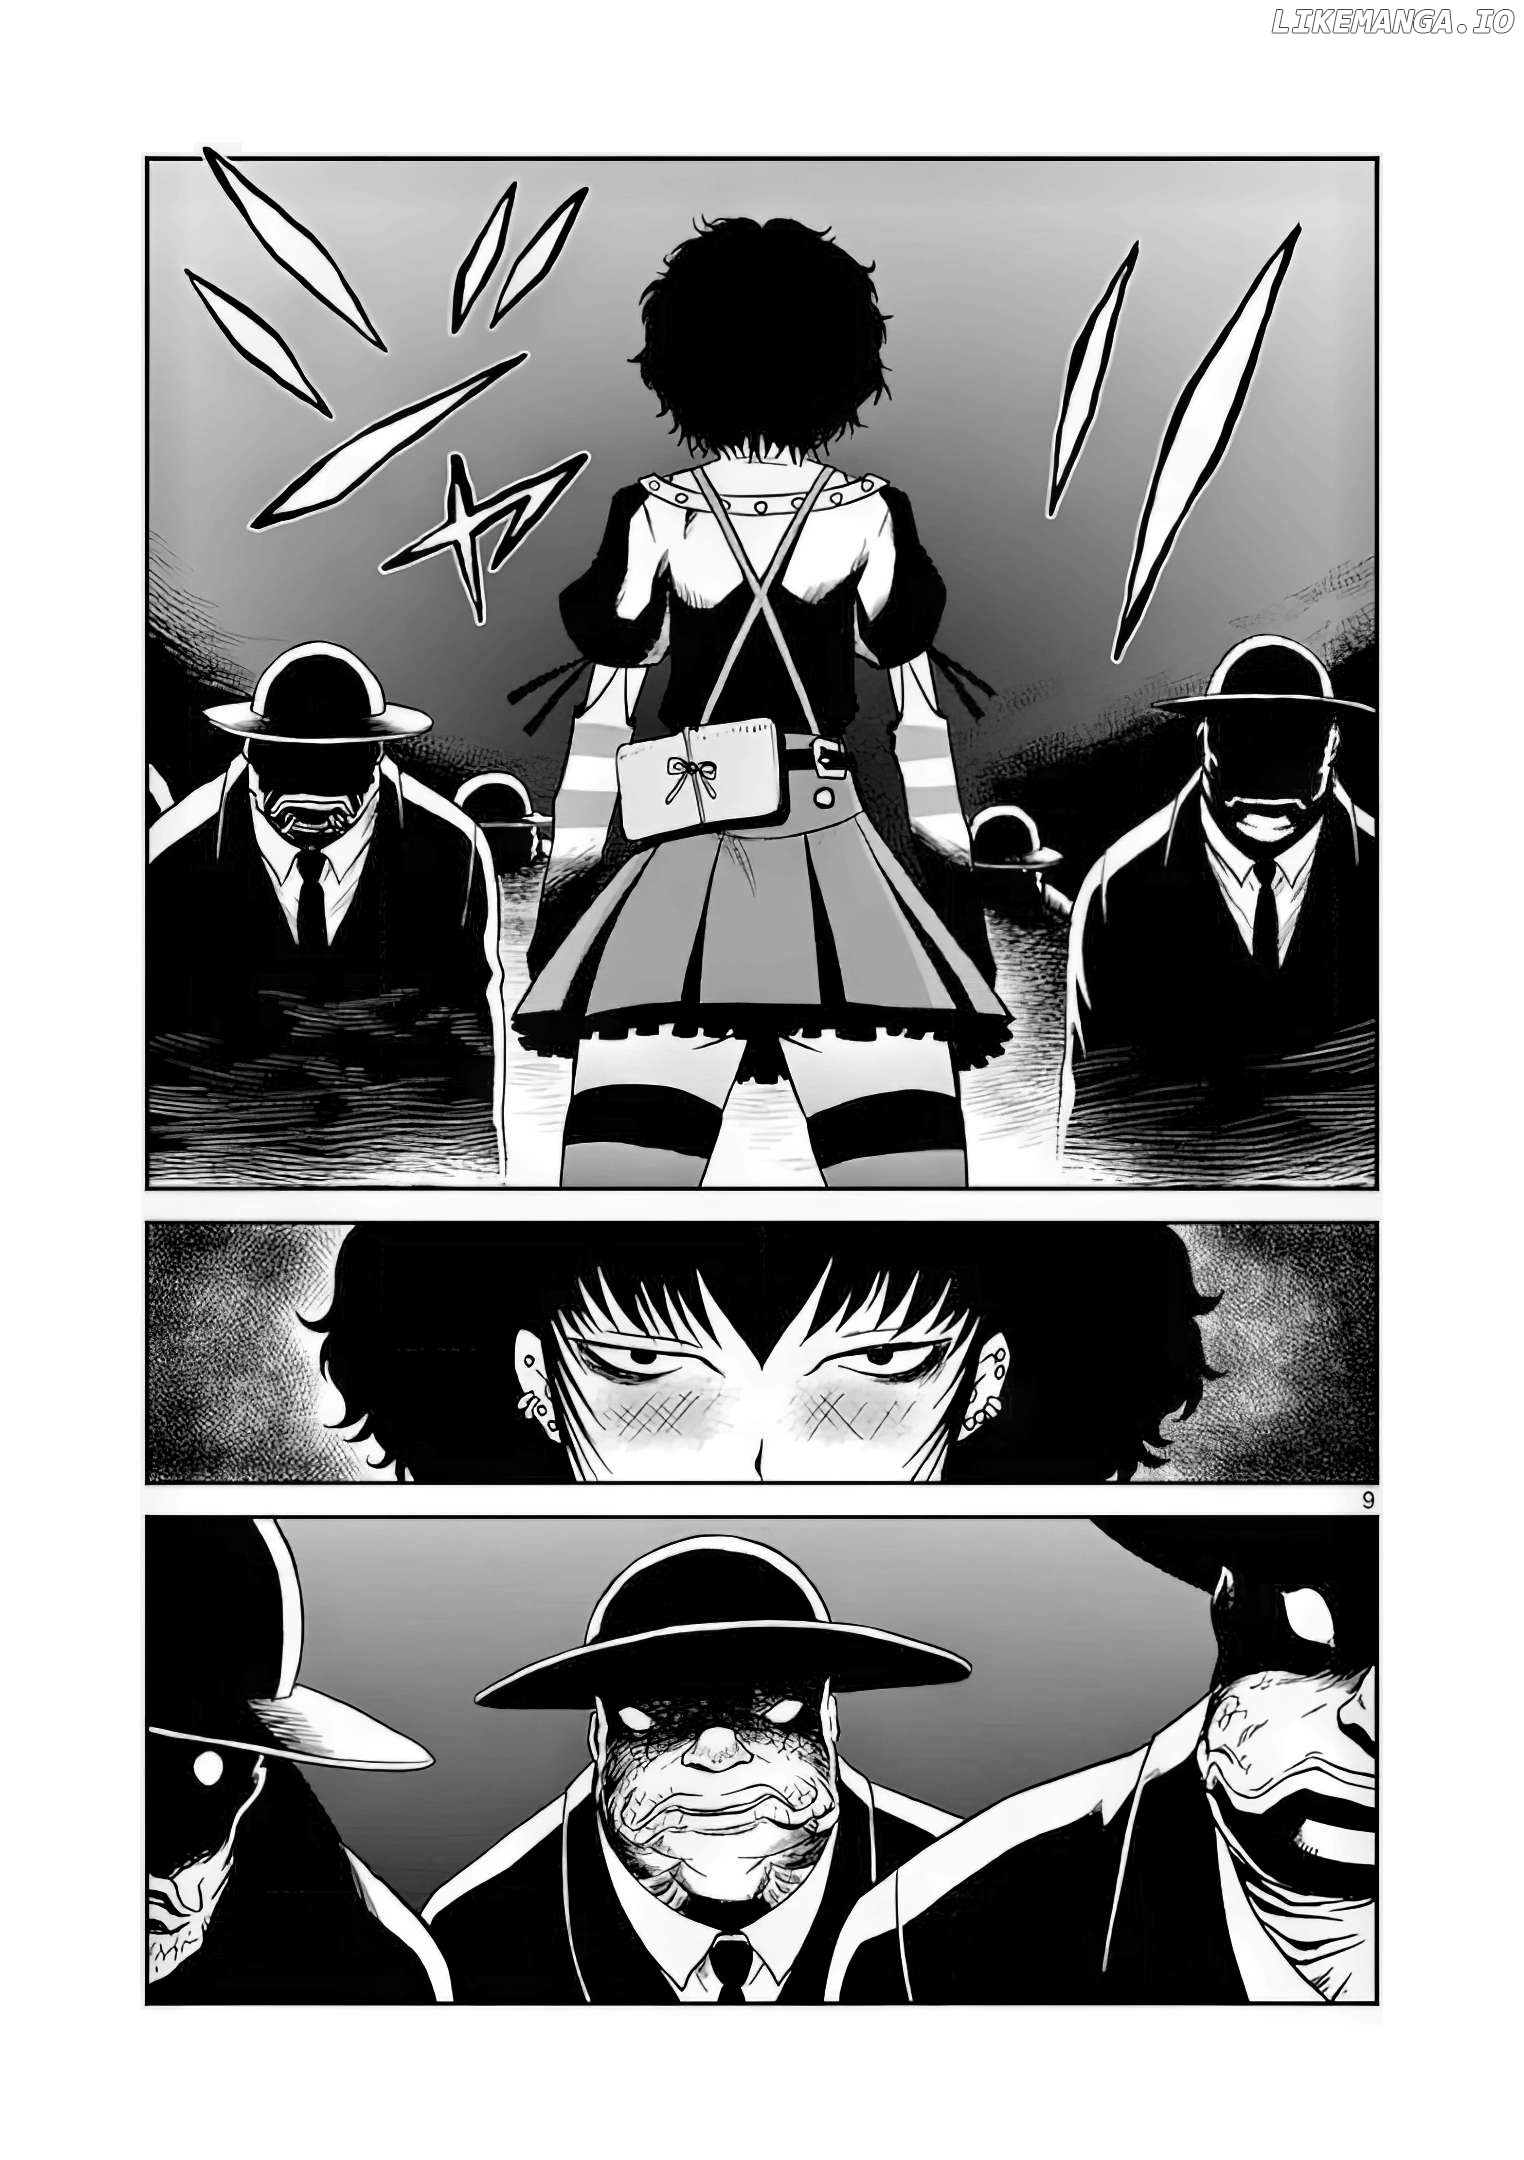 Black Lagoon: Sawyer the Cleaner - Dismemberment! Gore Gore Girl Chapter 2 - page 9